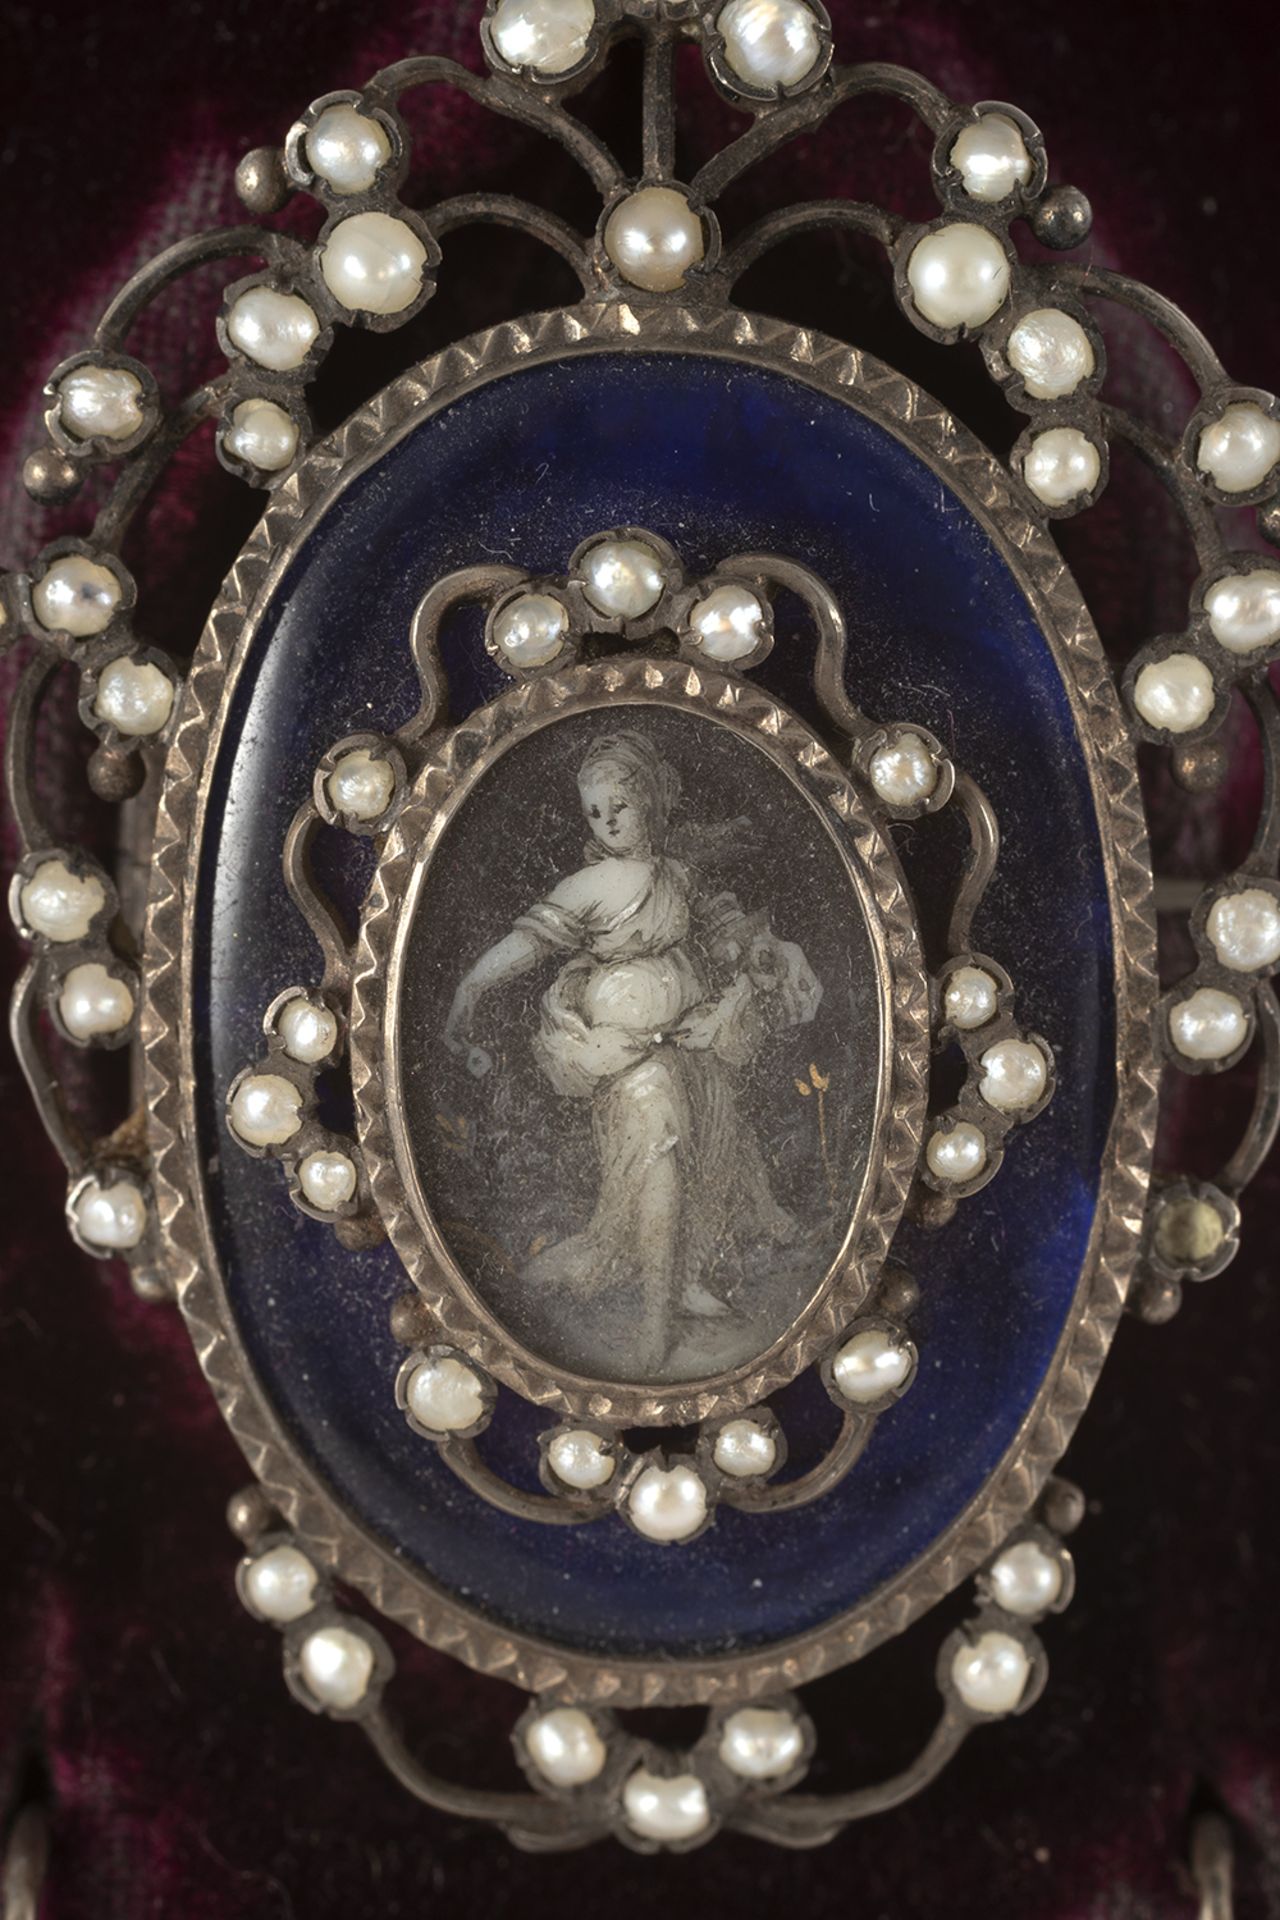 Set consisting of an Elizabethan brooch-pendant in silver, enamel and pearls with a representation o - Image 3 of 6